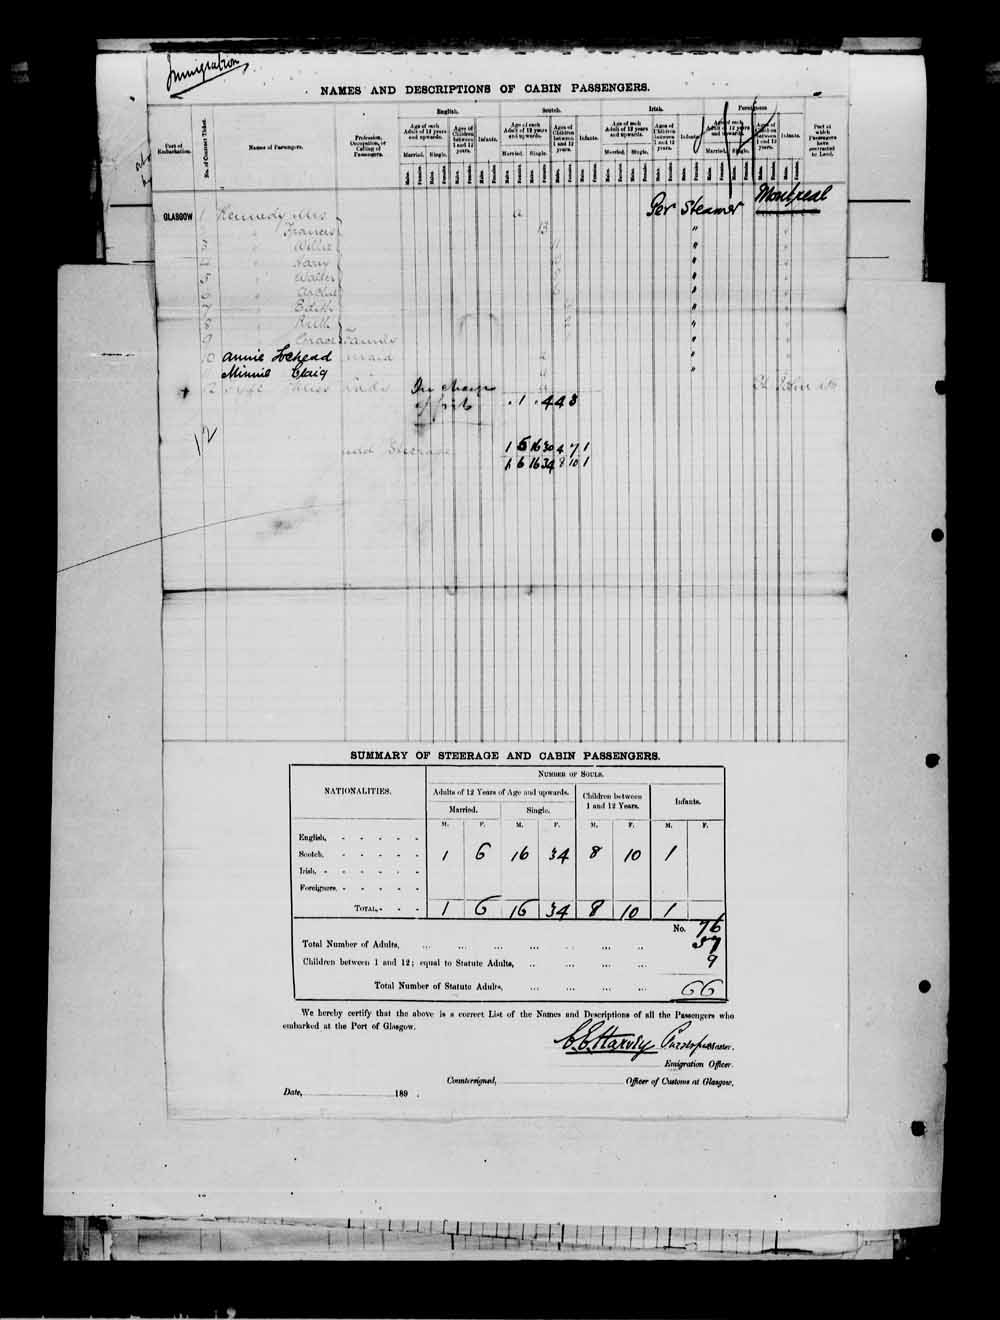 Digitized page of Quebec Passenger Lists for Image No.: e003551155